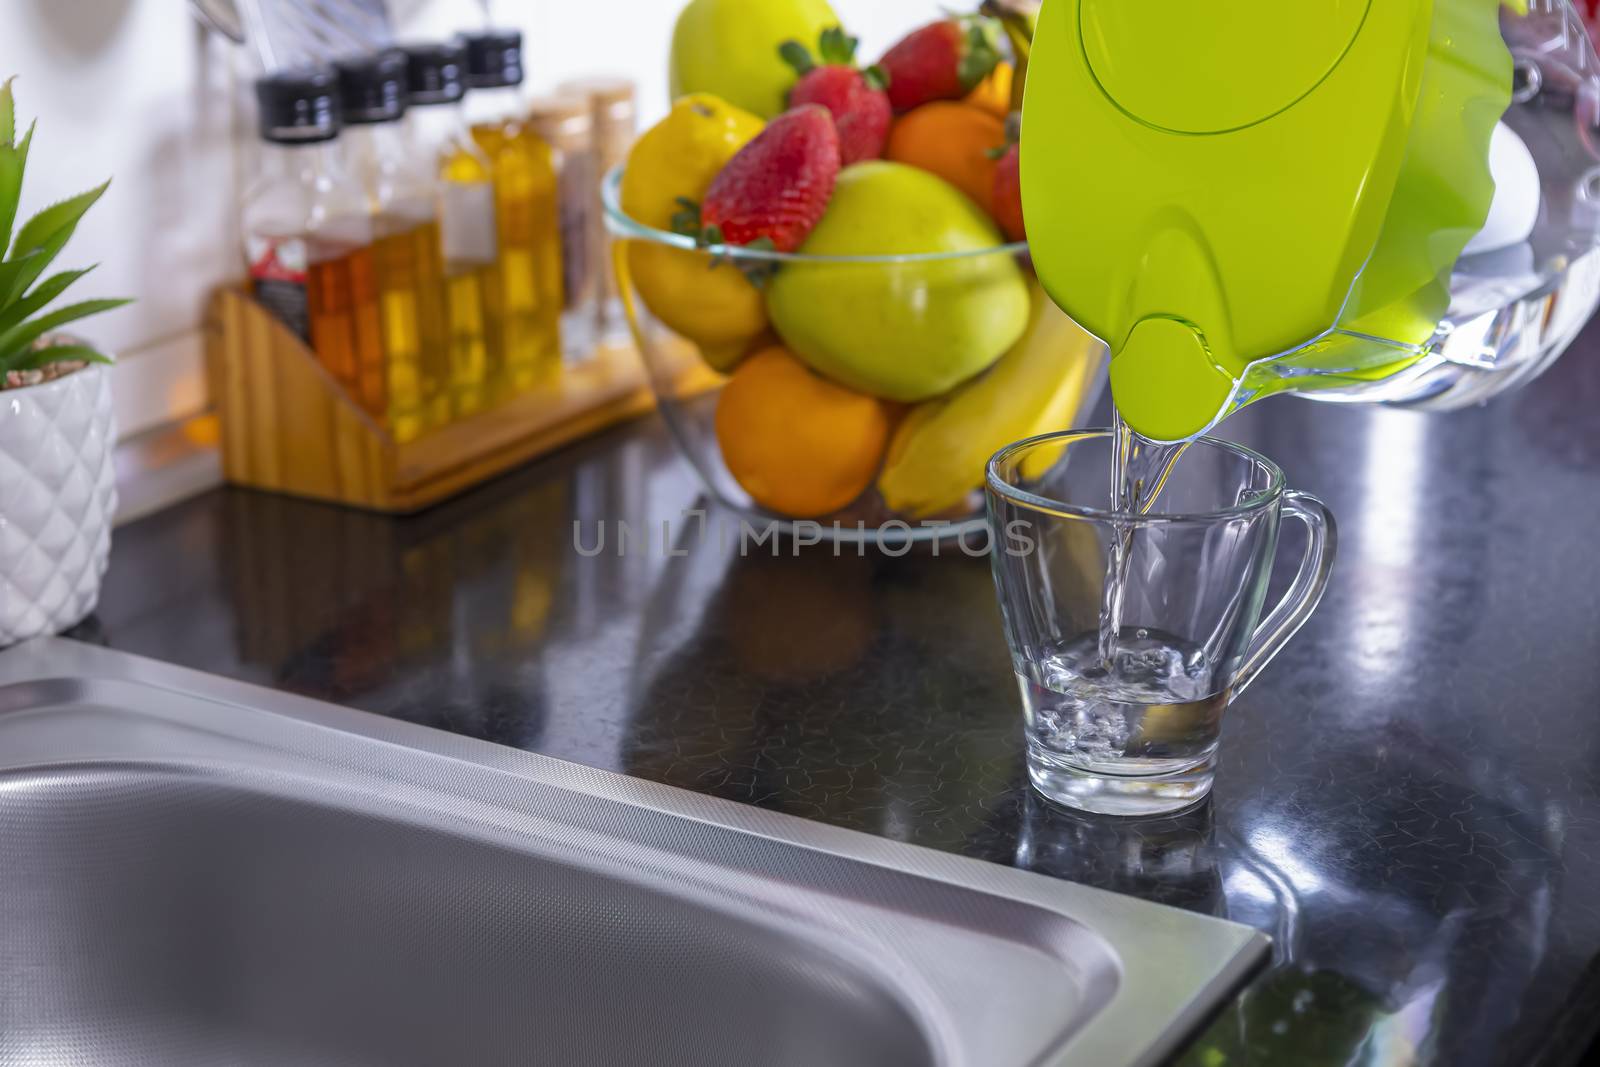 Pouring filtered water into glass from jug in the kitchen by manaemedia